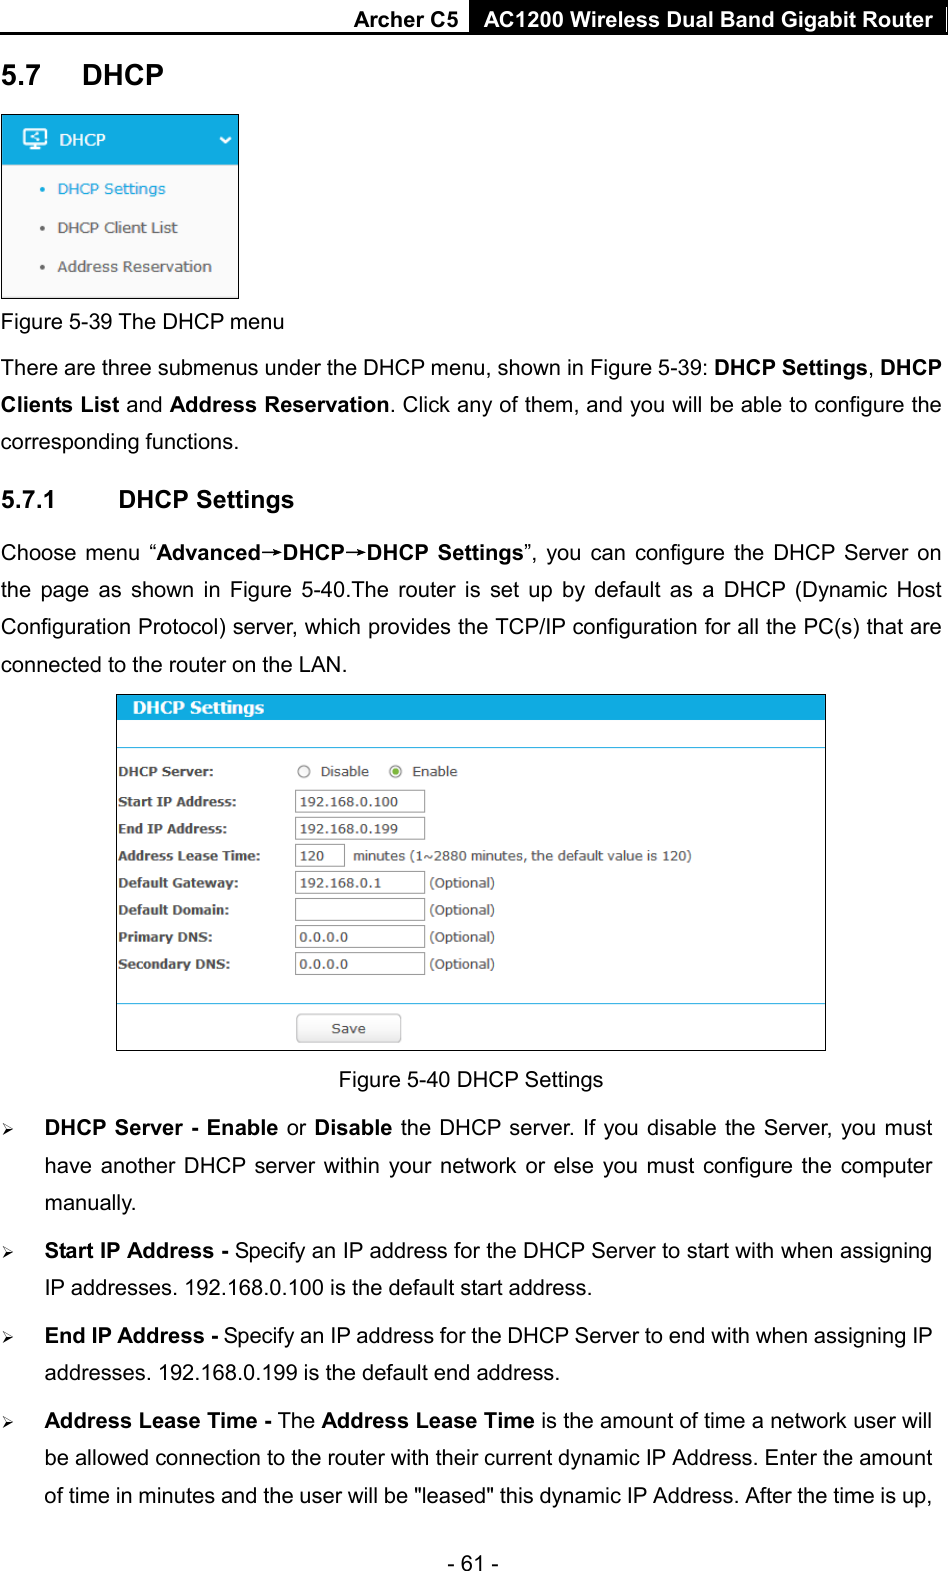 Archer C5  AC1200 Wireless Dual Band Gigabit Router  5.7 DHCP  Figure 5-39 The DHCP menu There are three submenus under the DHCP menu, shown in Figure 5-39: DHCP Settings, DHCP Clients List and Address Reservation. Click any of them, and you will be able to configure the corresponding functions. 5.7.1 DHCP Settings Choose menu “Advanced→DHCP→DHCP Settings”, you can configure the DHCP Server on the page as shown in Figure 5-40.The router is set up by default as a DHCP (Dynamic Host Configuration Protocol) server, which provides the TCP/IP configuration for all the PC(s) that are connected to the router on the LAN.    Figure 5-40 DHCP Settings  DHCP Server - Enable or Disable the DHCP server. If you disable the Server, you must have another DHCP server within your network or else you must configure the computer manually.  Start IP Address - Specify an IP address for the DHCP Server to start with when assigning IP addresses. 192.168.0.100 is the default start address.  End IP Address - Specify an IP address for the DHCP Server to end with when assigning IP addresses. 192.168.0.199 is the default end address.  Address Lease Time - The Address Lease Time is the amount of time a network user will be allowed connection to the router with their current dynamic IP Address. Enter the amount of time in minutes and the user will be &quot;leased&quot; this dynamic IP Address. After the time is up, - 61 - 